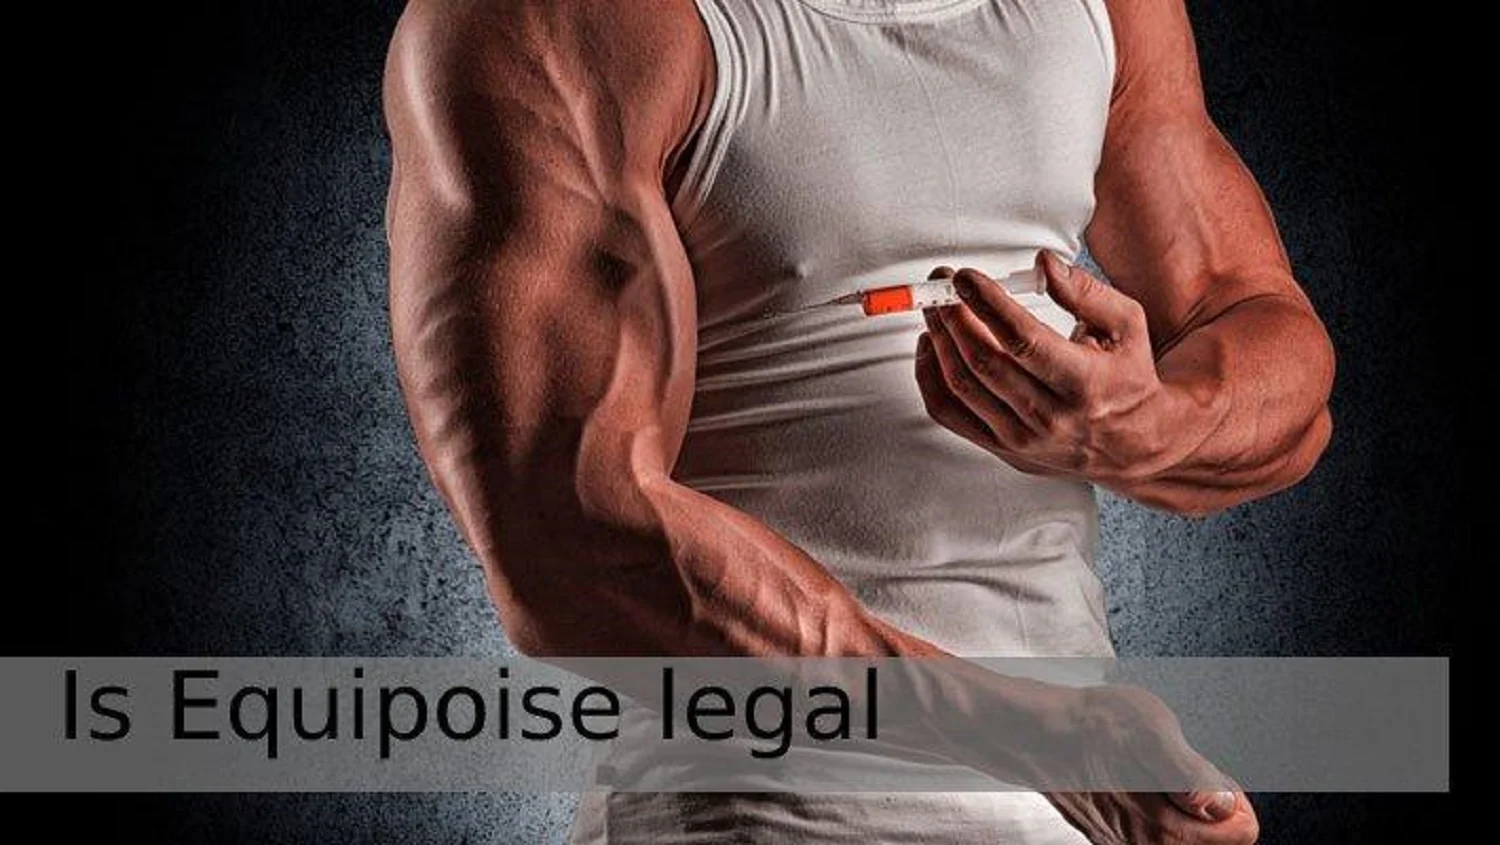 Where and How Long Is Equipoise Legal